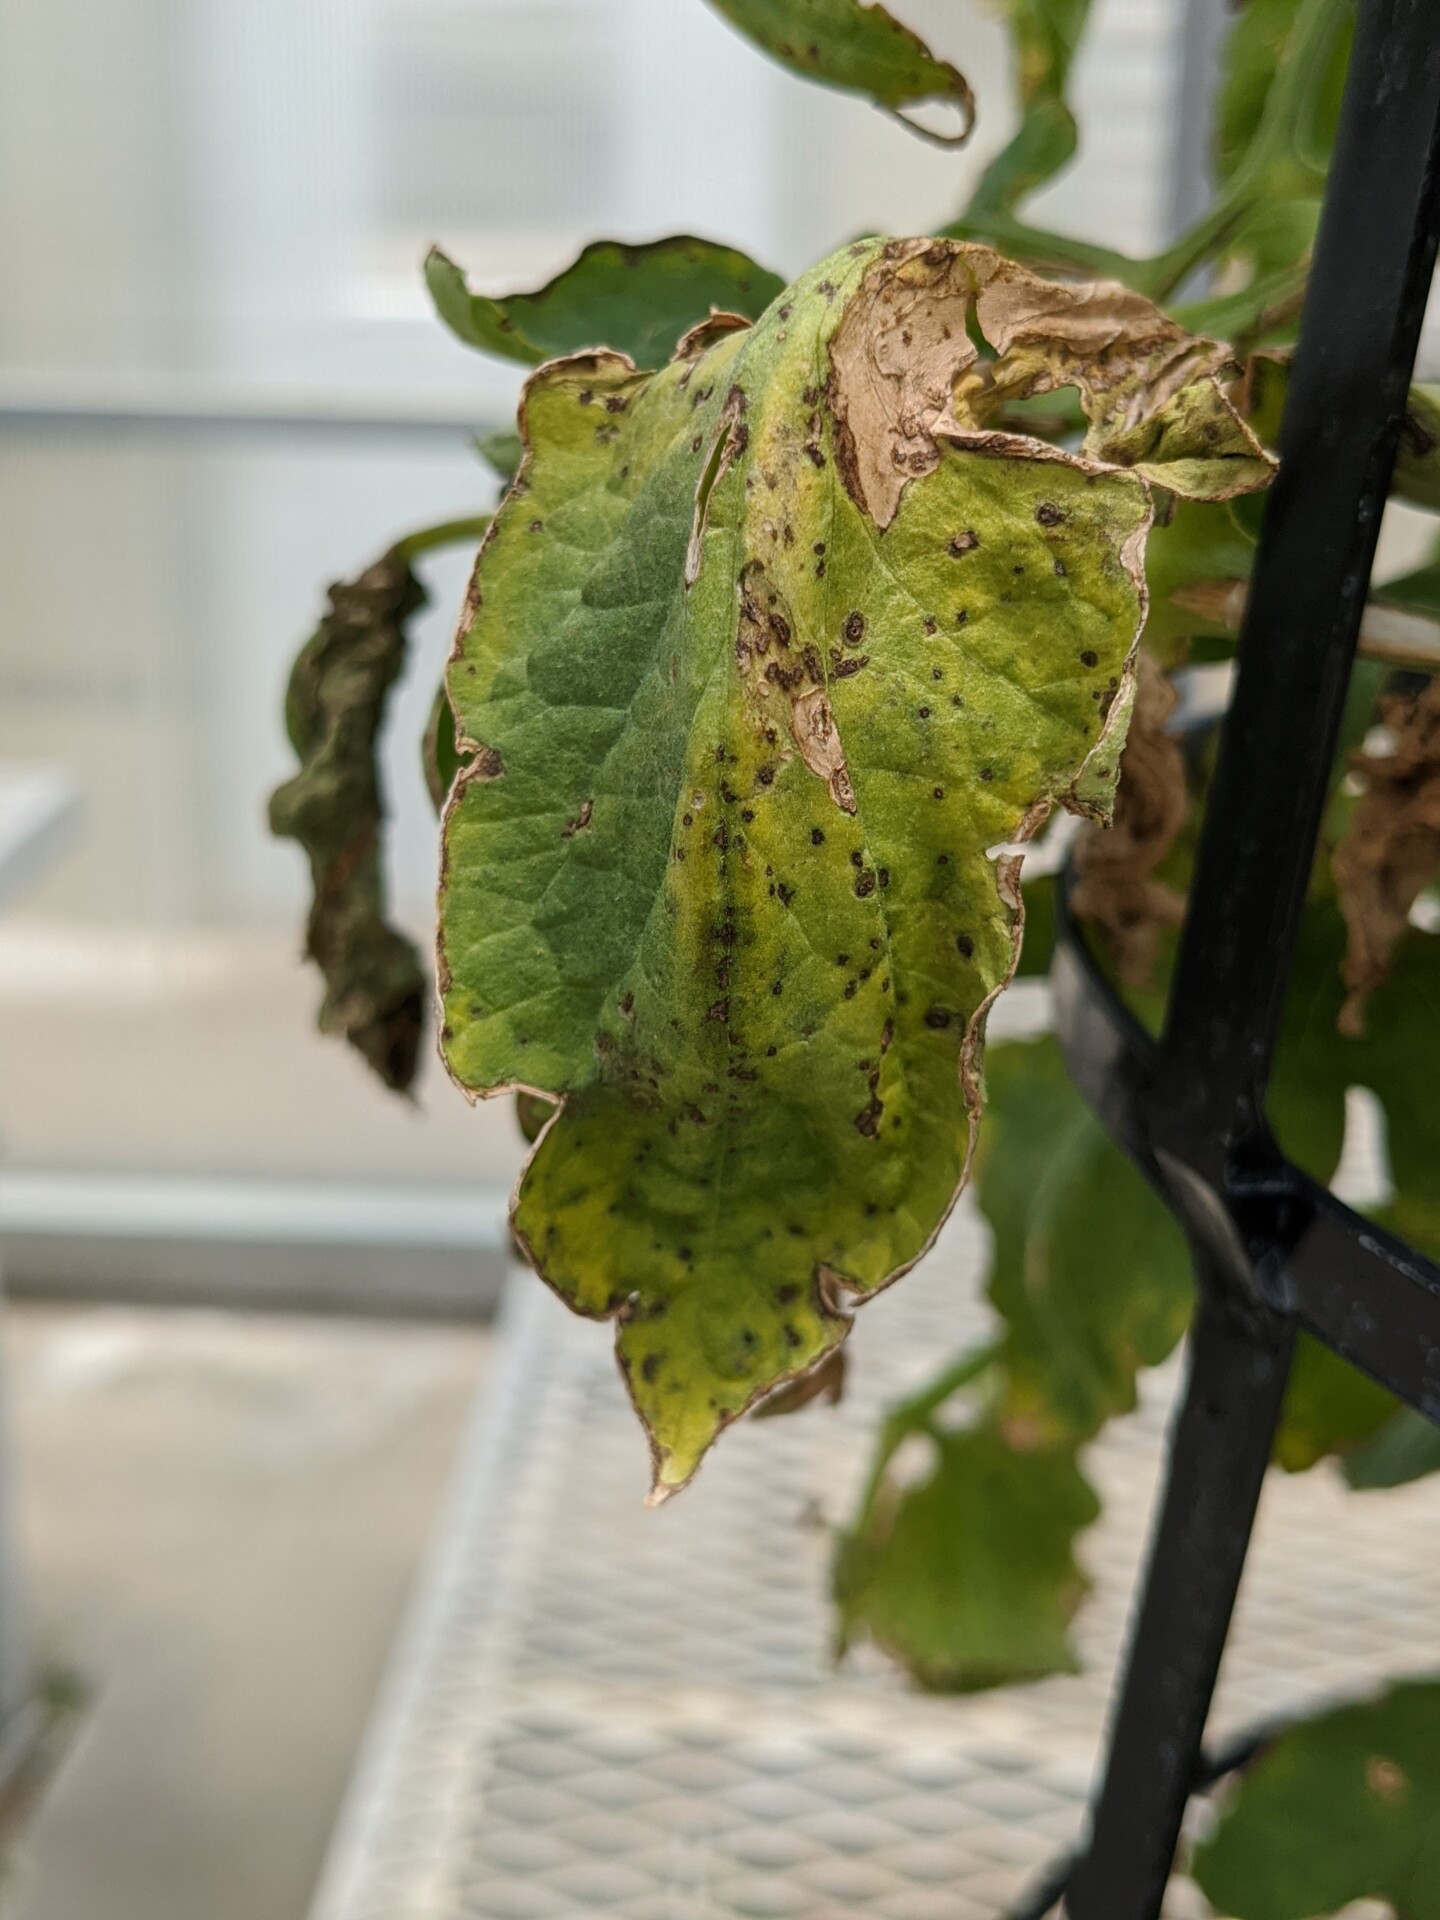 Figure 6. Lesions of bacterial spot on a tomato leaf.